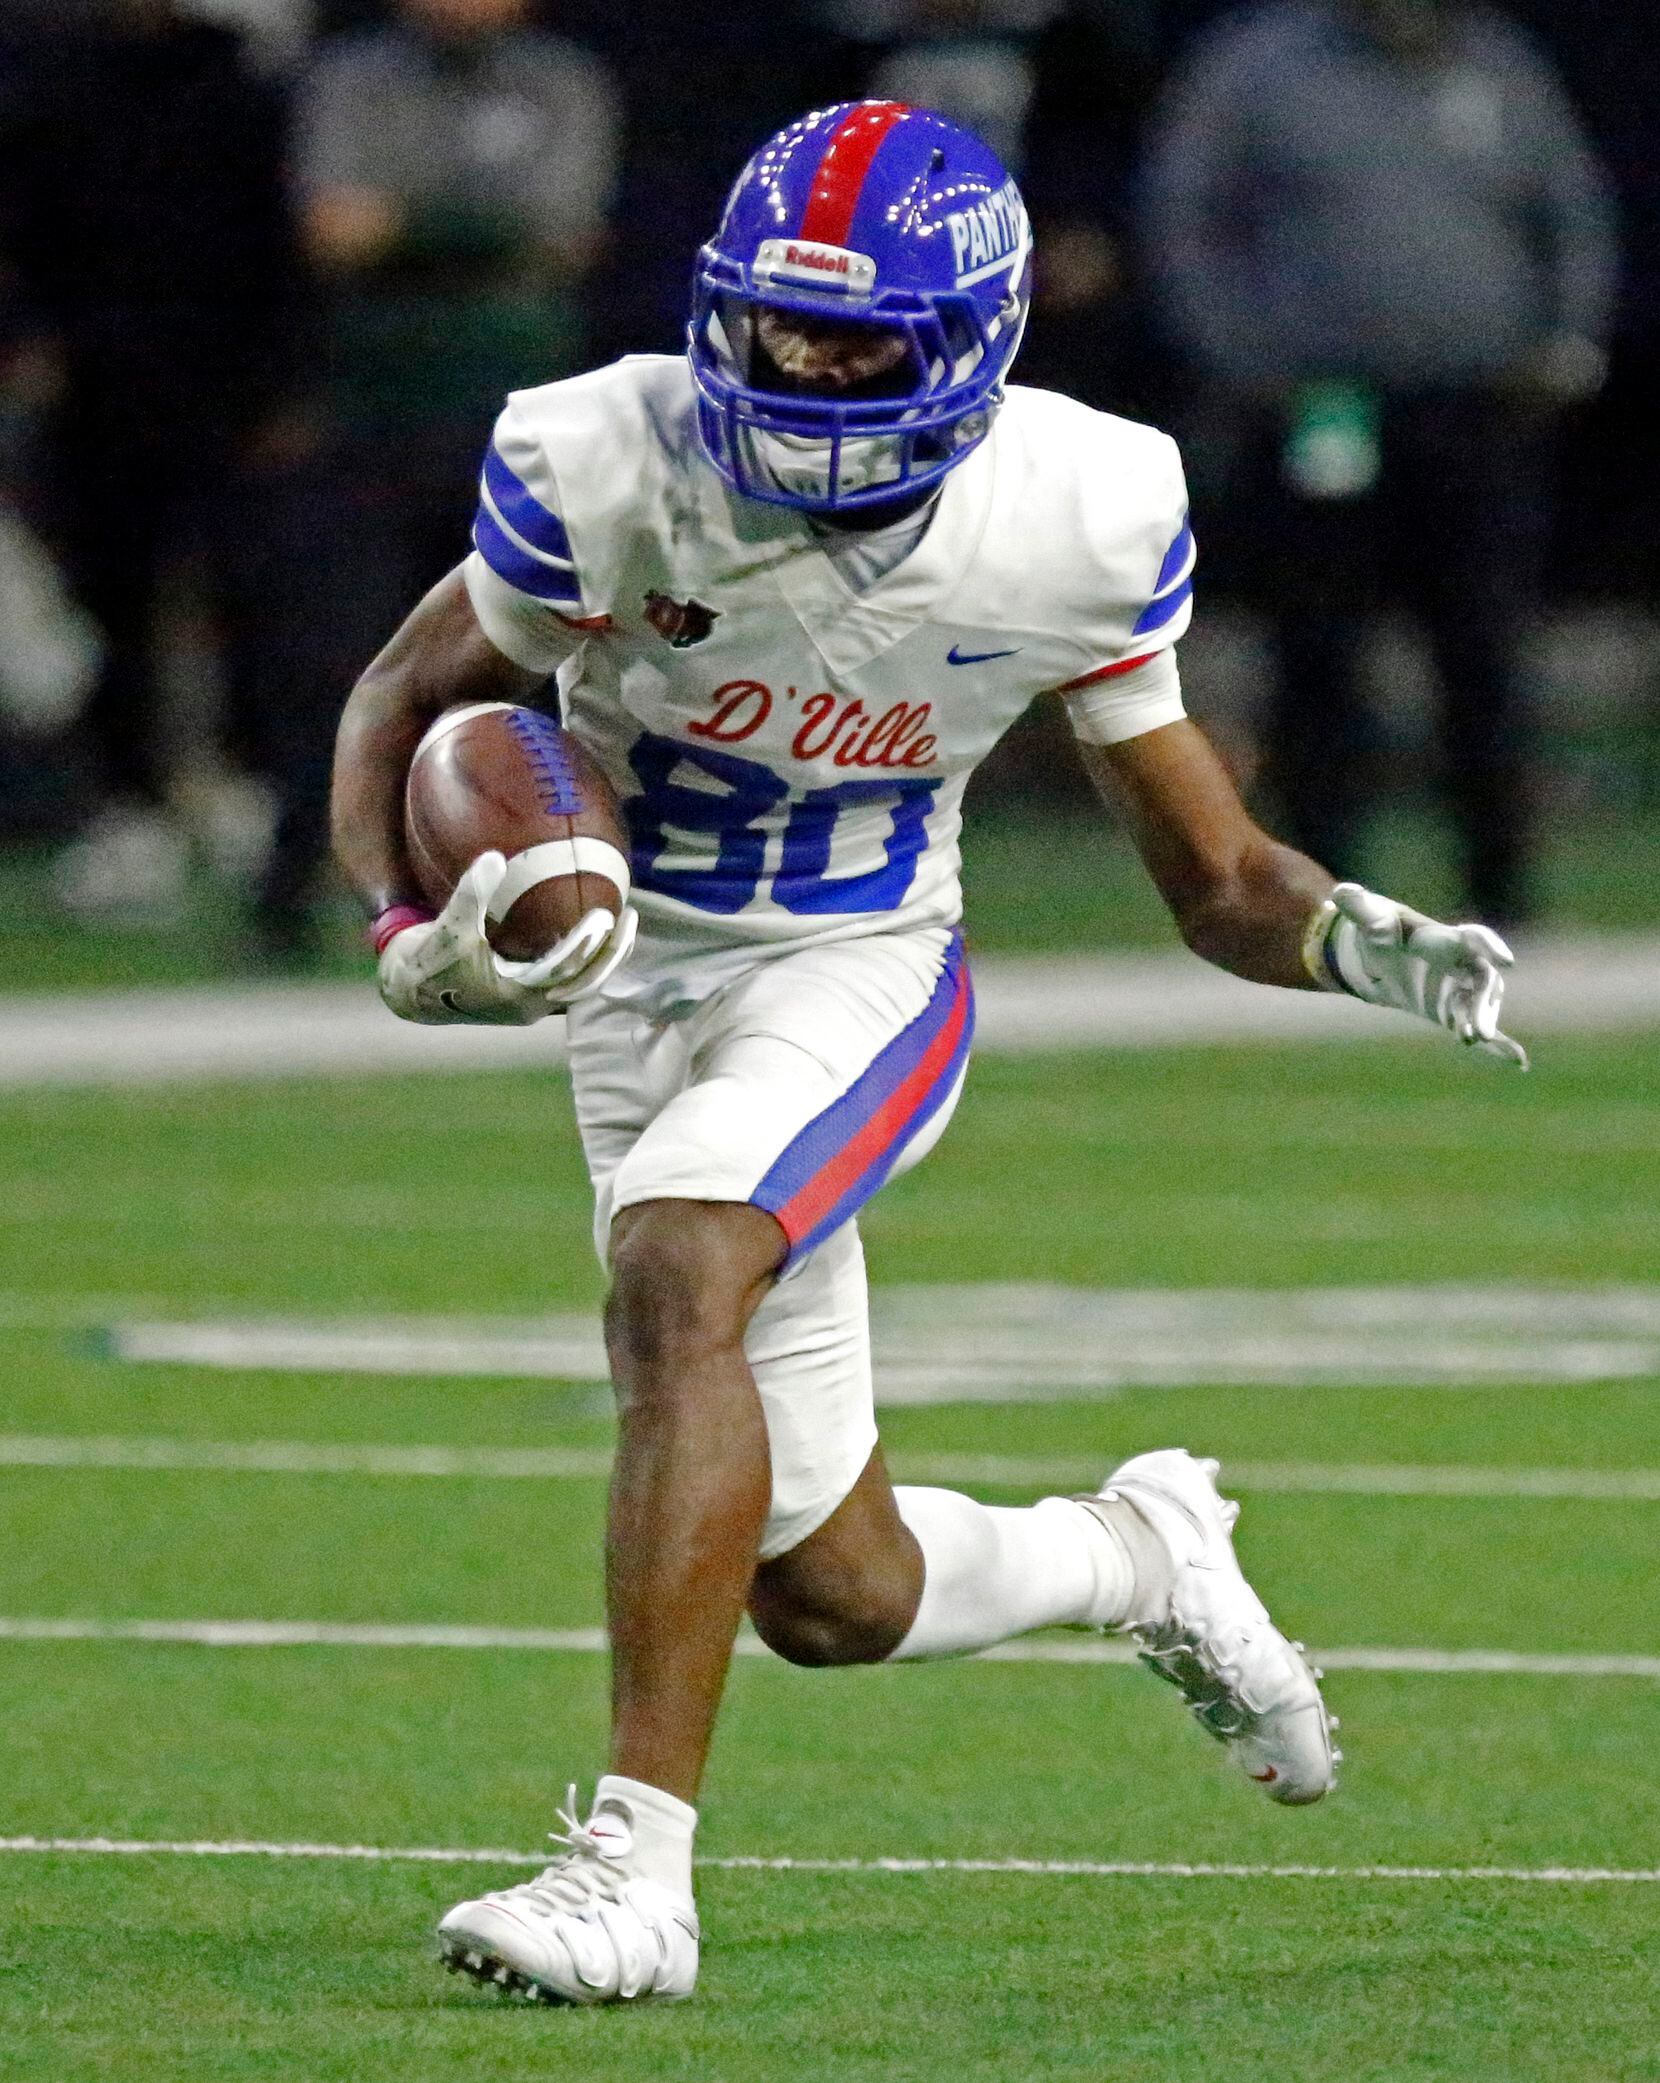 Duncanville High School wide receiver Dakorien Moore (80)  runs after the catch during the first half as Duncanville High School played Spring High School in a Class 6A Division I Region II semifinal football game at The Ford Center in Frisco on Saturday, November 27, 2021. (Stewart F. House/Special Contributor)